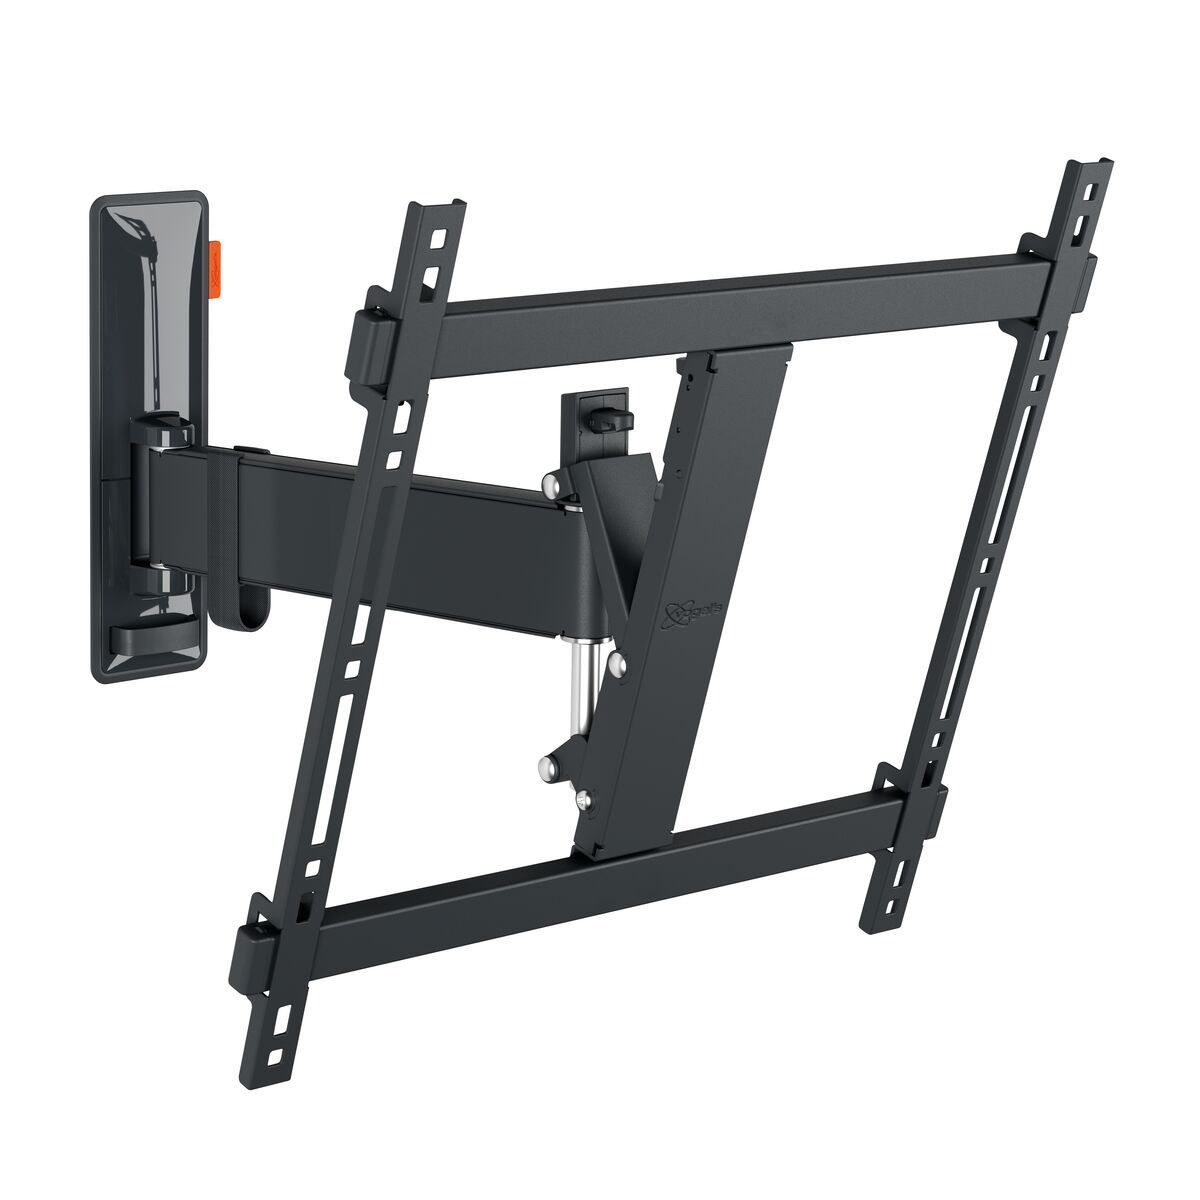 Vogel's TVM 3423 Full-Motion TV Wall Mount - Suitable for 32 up to 65 inch TVs - Motion (up to 120°) swivel - Tilt up to 20° - Product